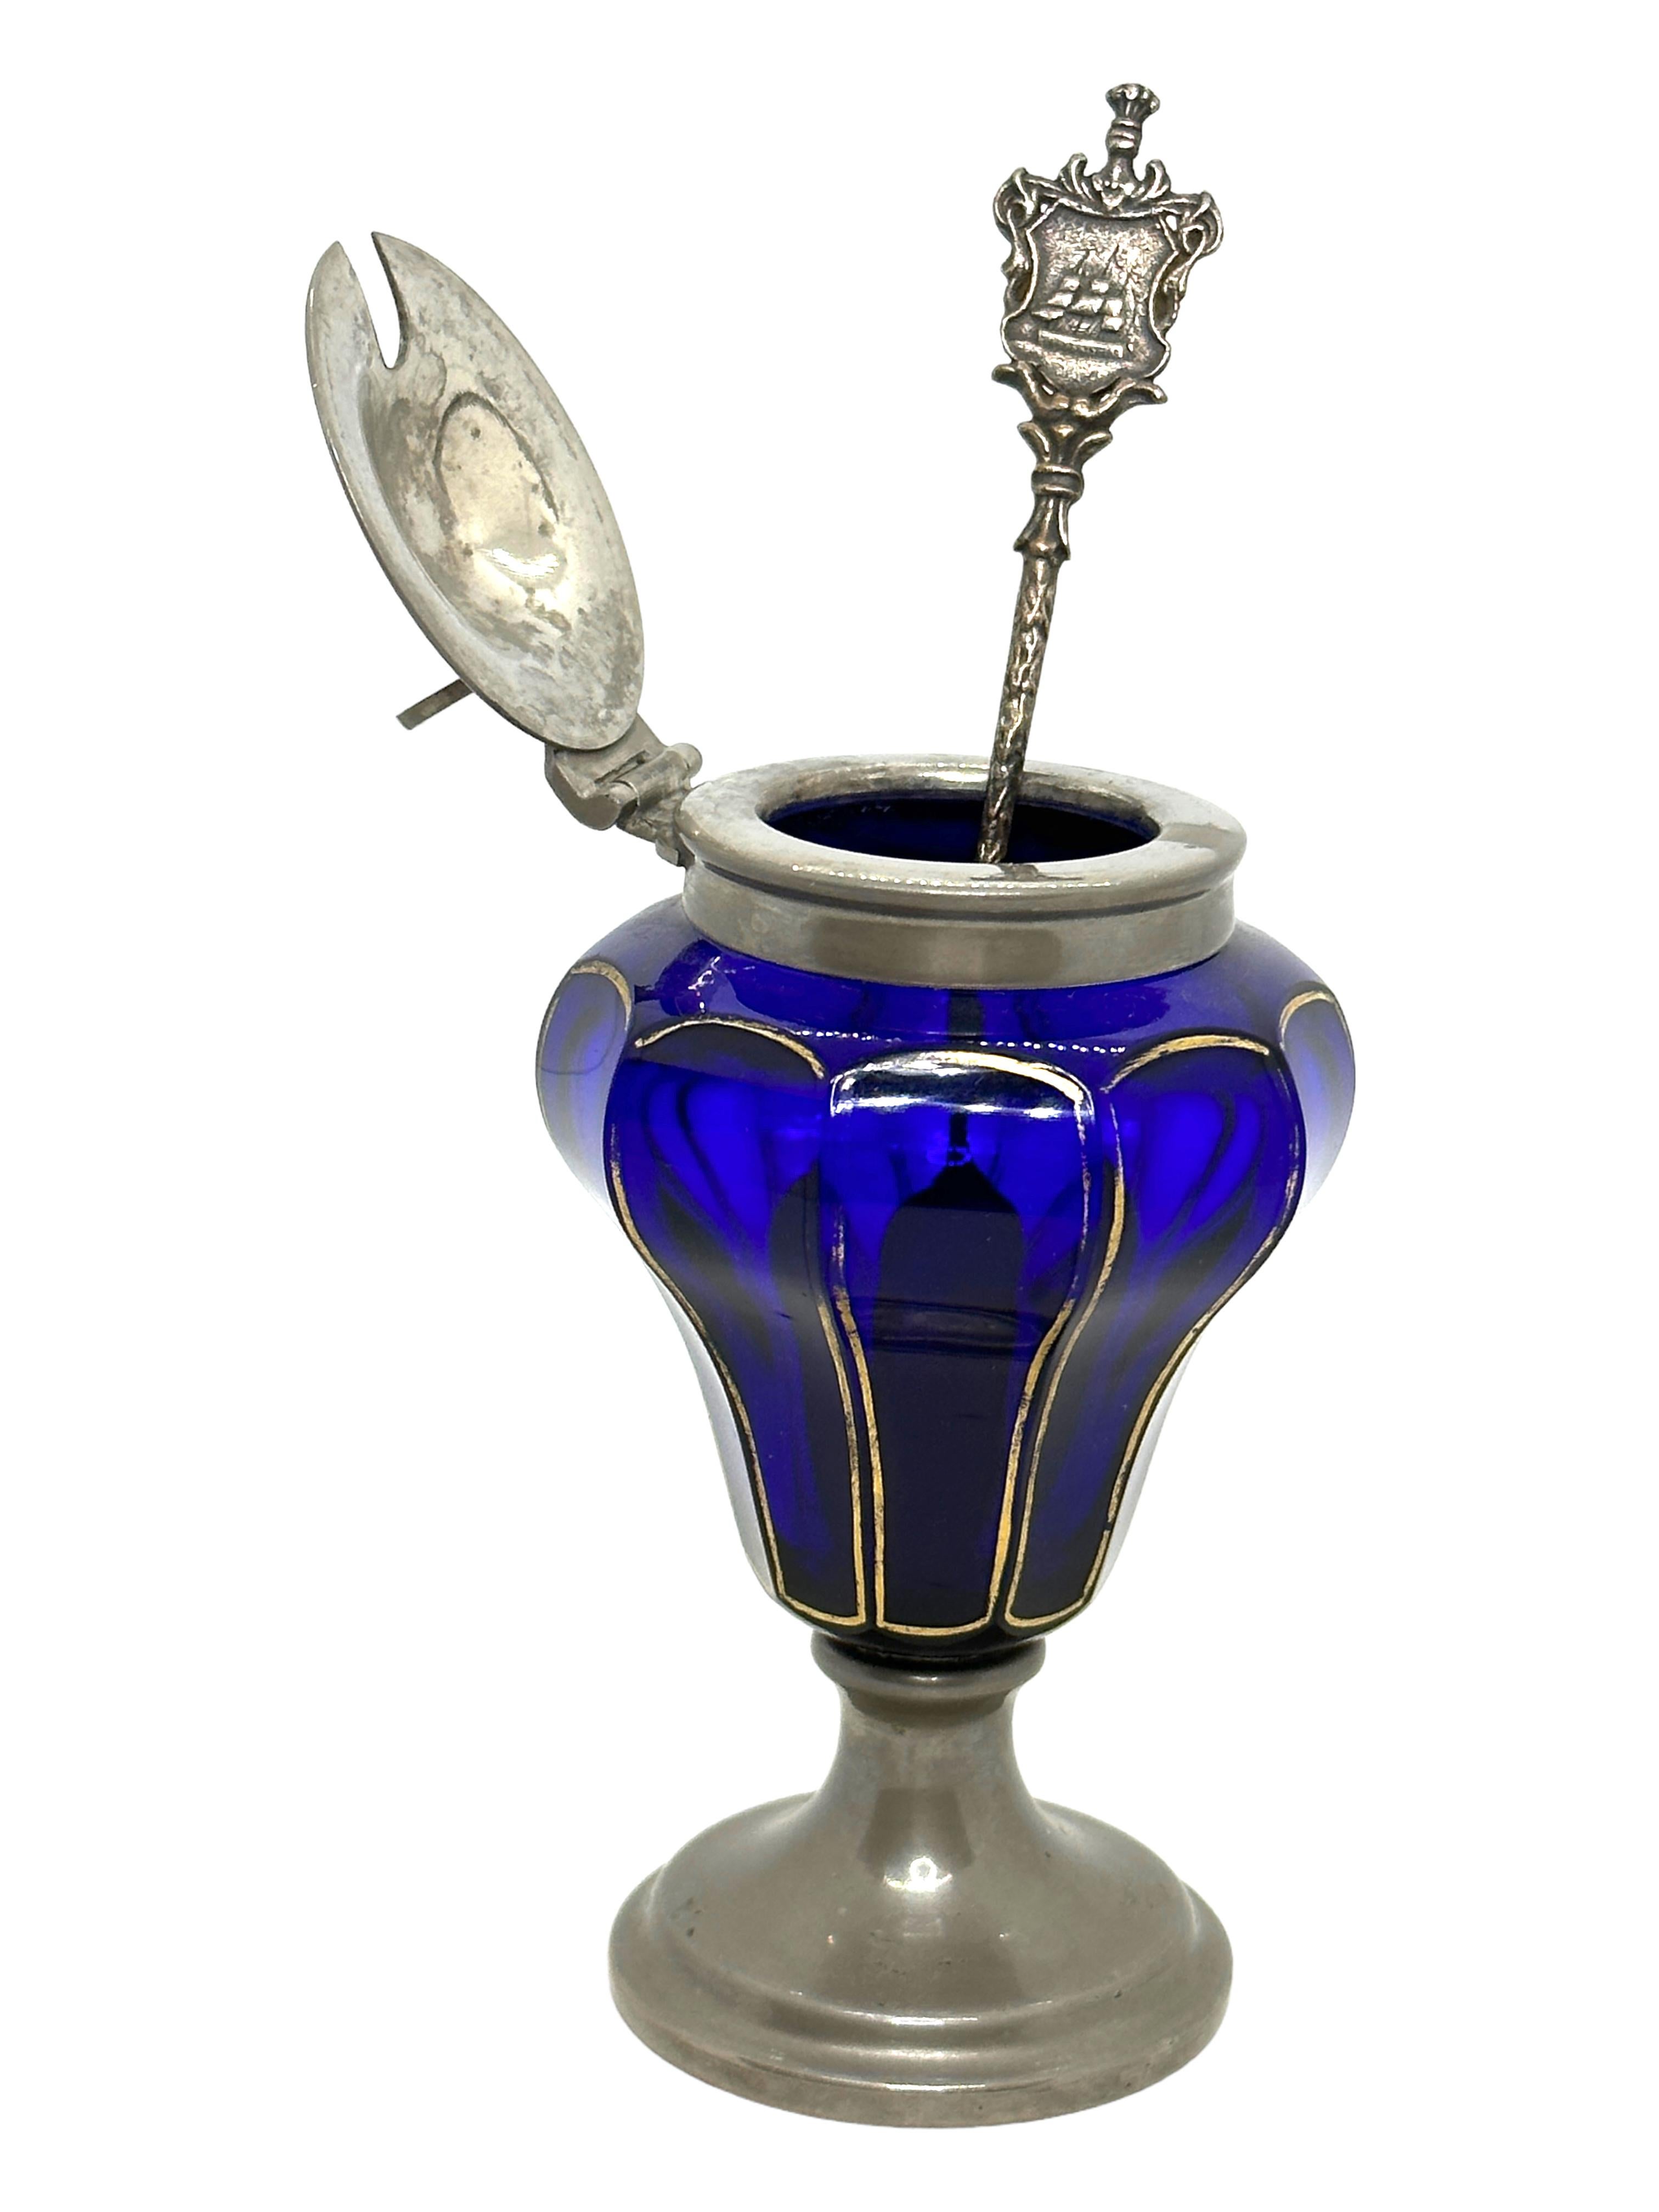 Hand-Crafted Magnificent Gilded Blue Glass & Pewter Mustard or Marmalade Pot, Antique German